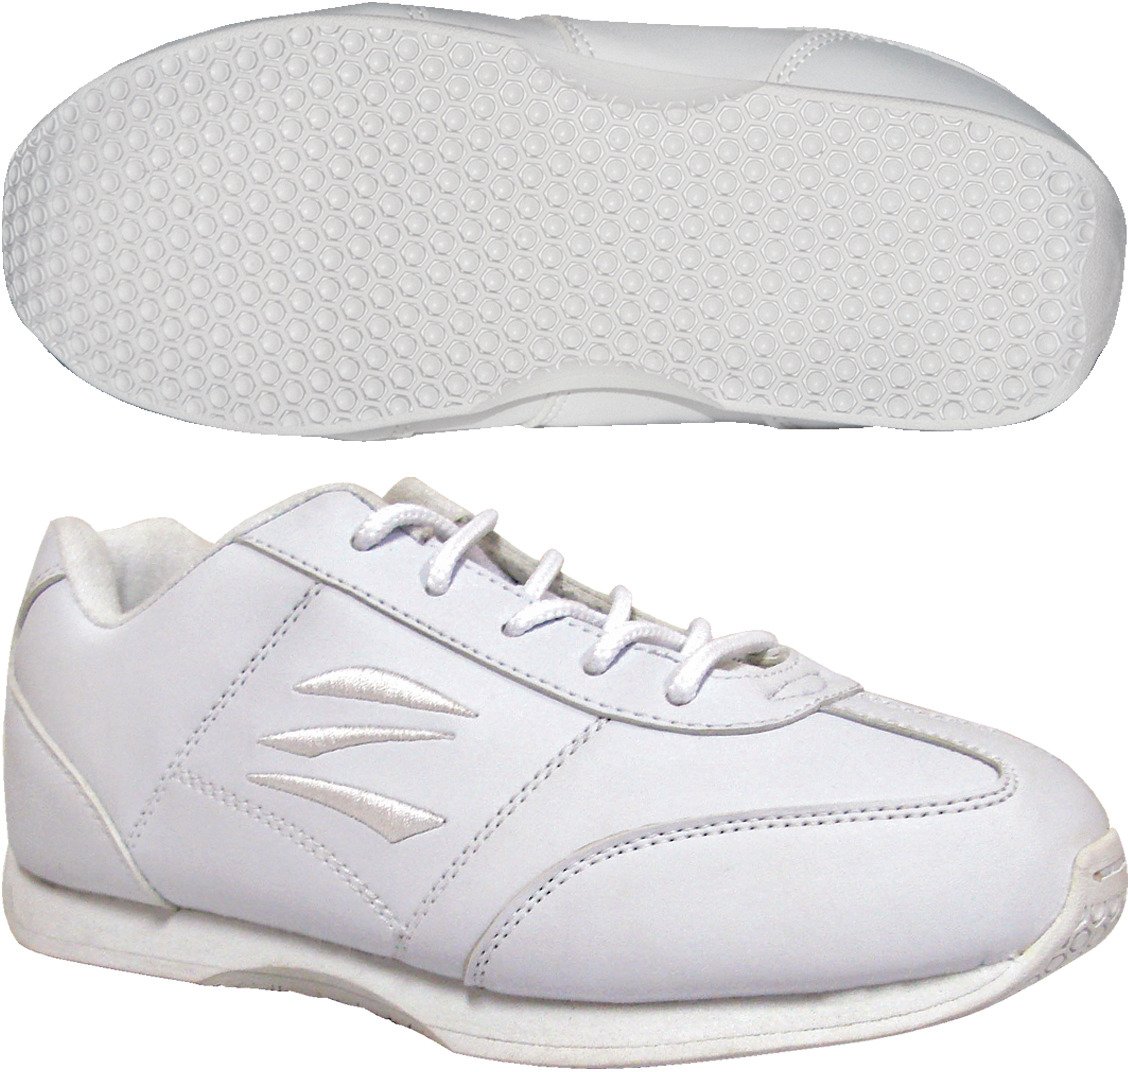 Cheerleading Shoes | Cheer Shoes 